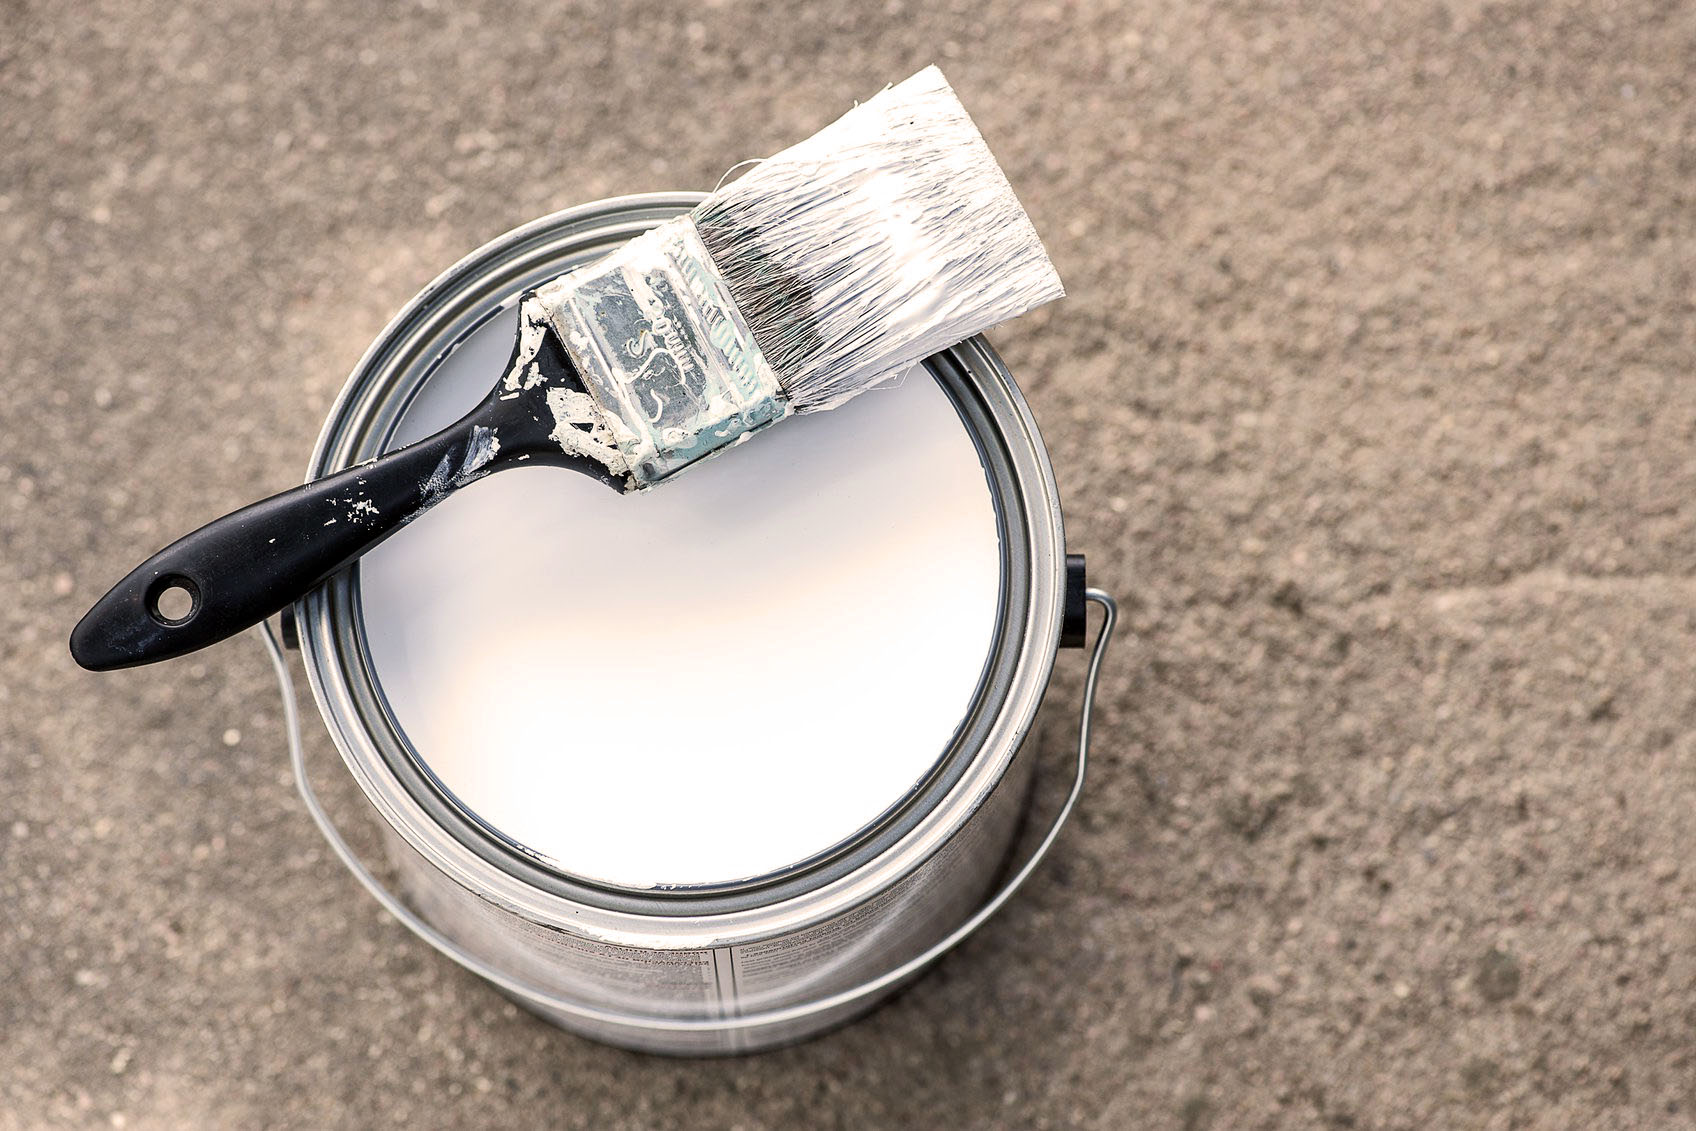 Paint priming company for exterior buildings in Tempe, Arizona